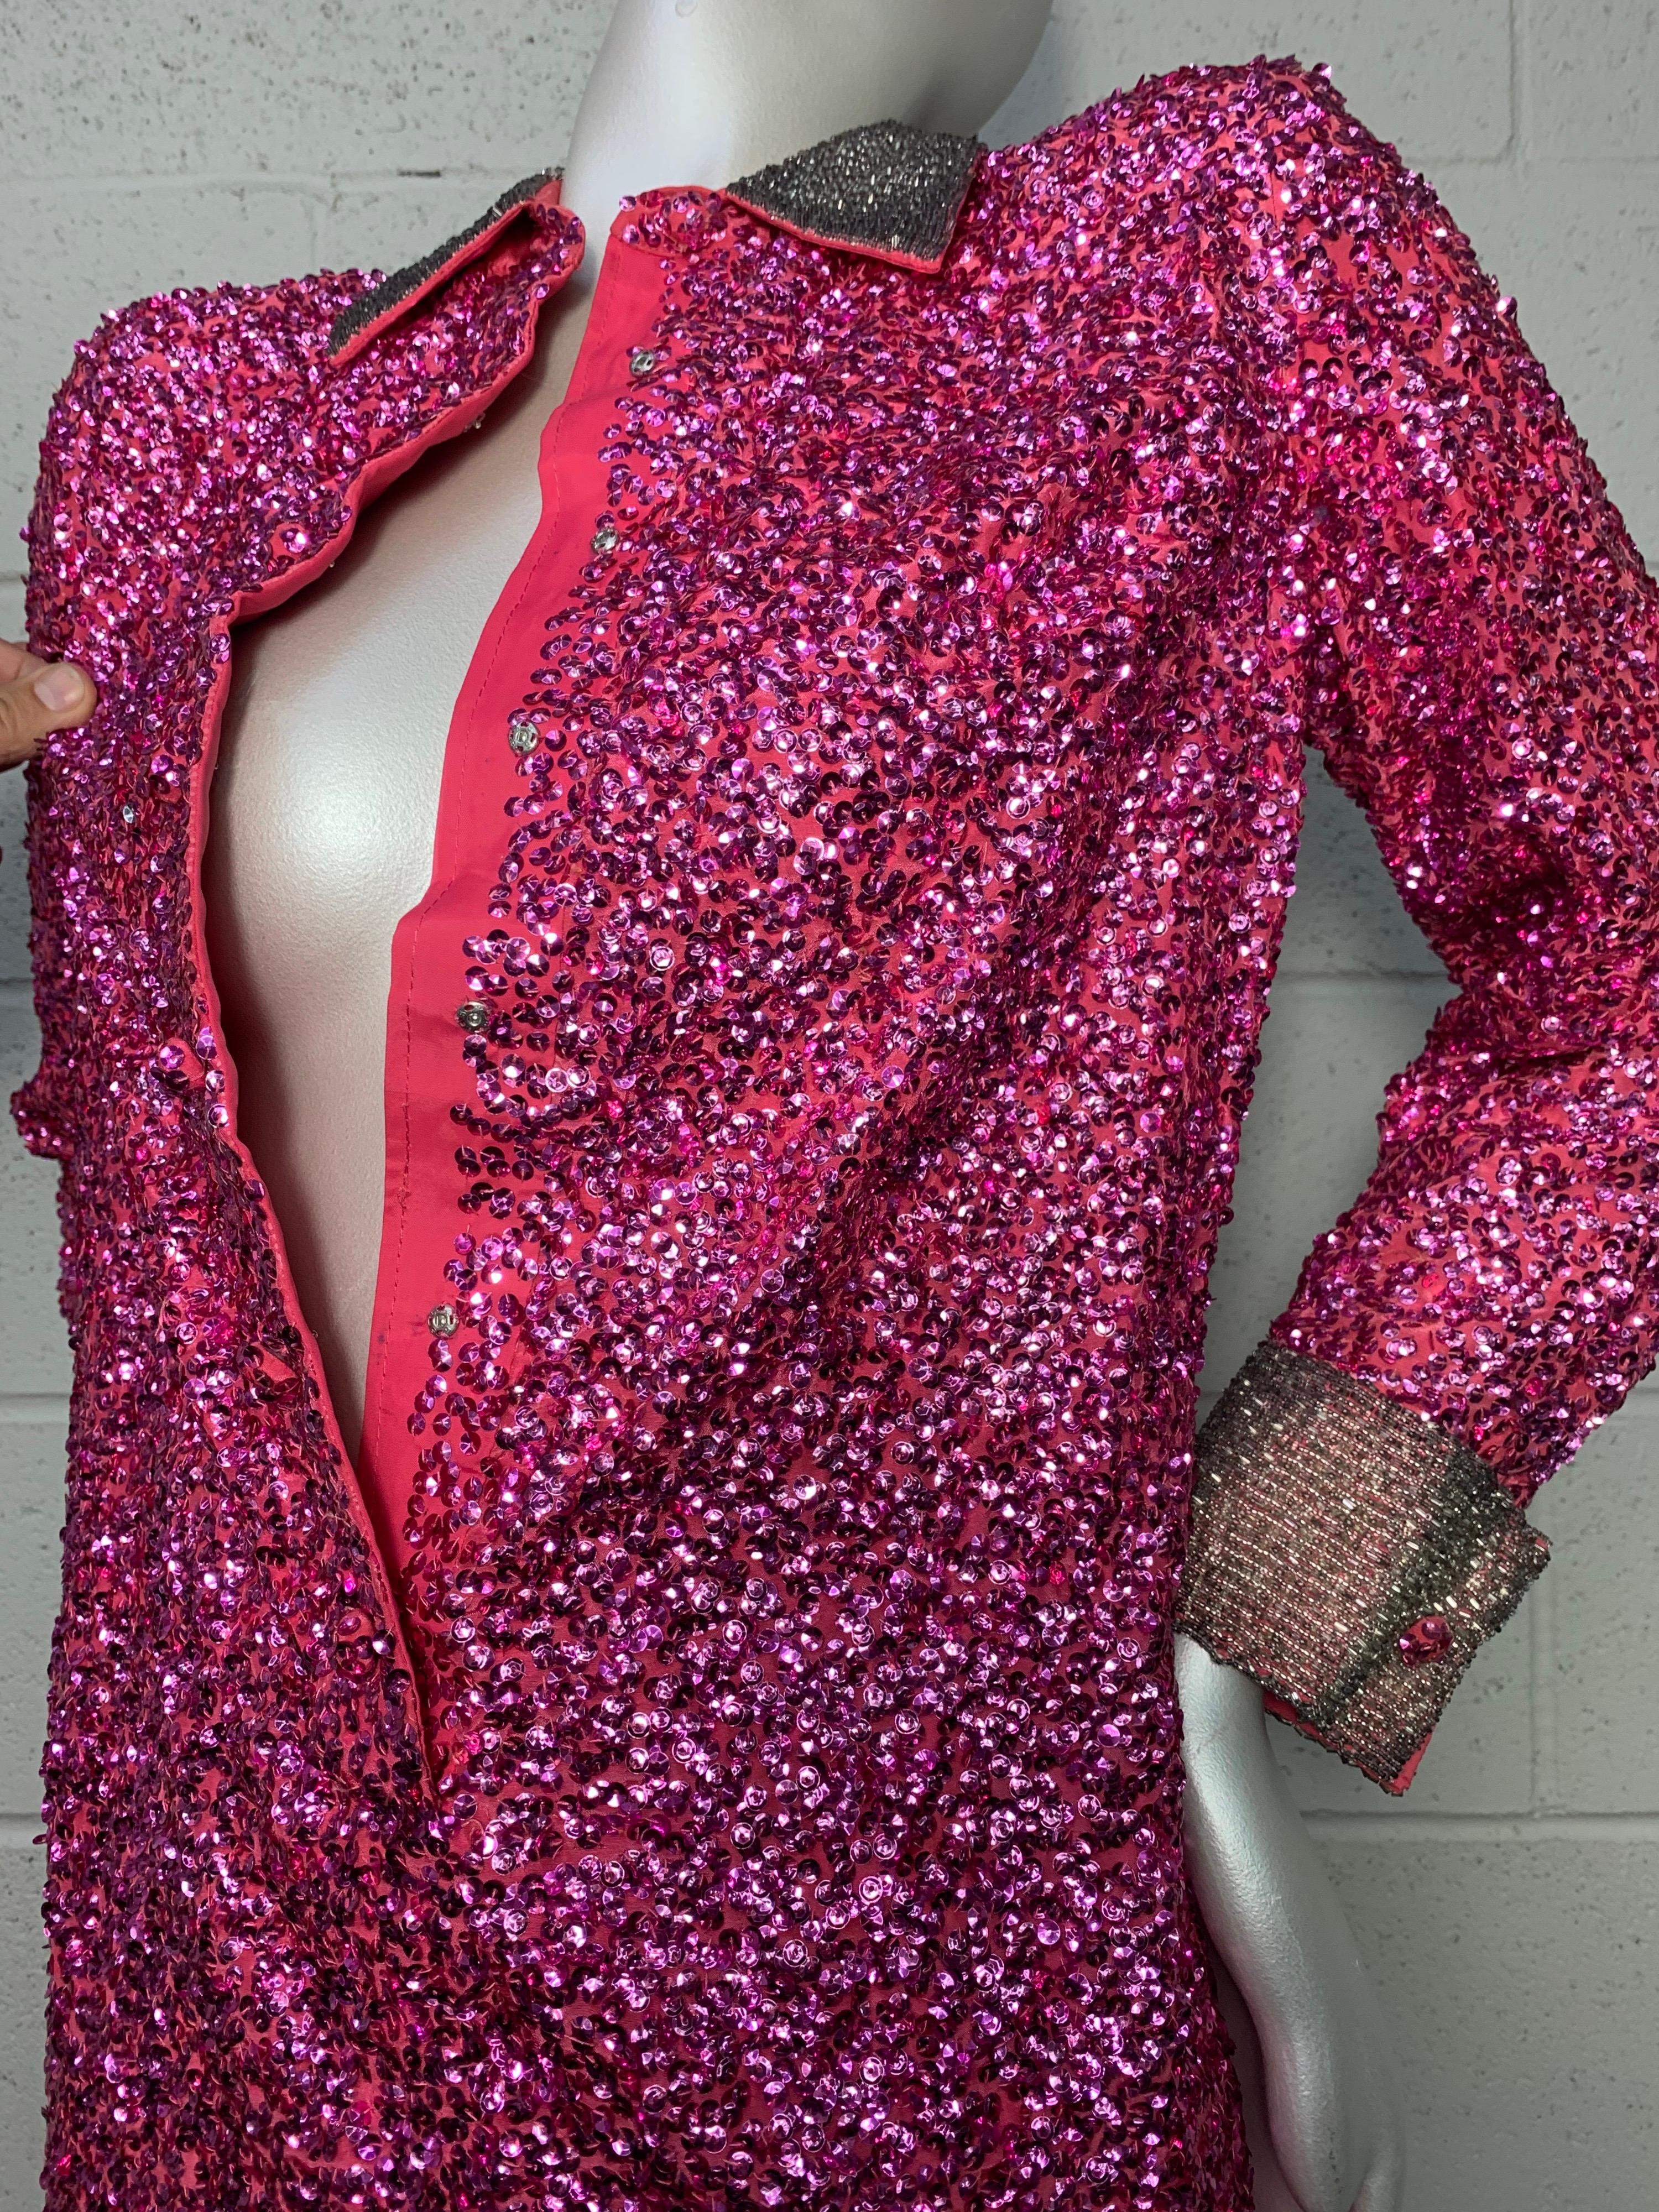 1960s Vivid Fuchsia Sequined Mod Mini Dress w/ Silver Beaded Collar and Cuffs For Sale 6